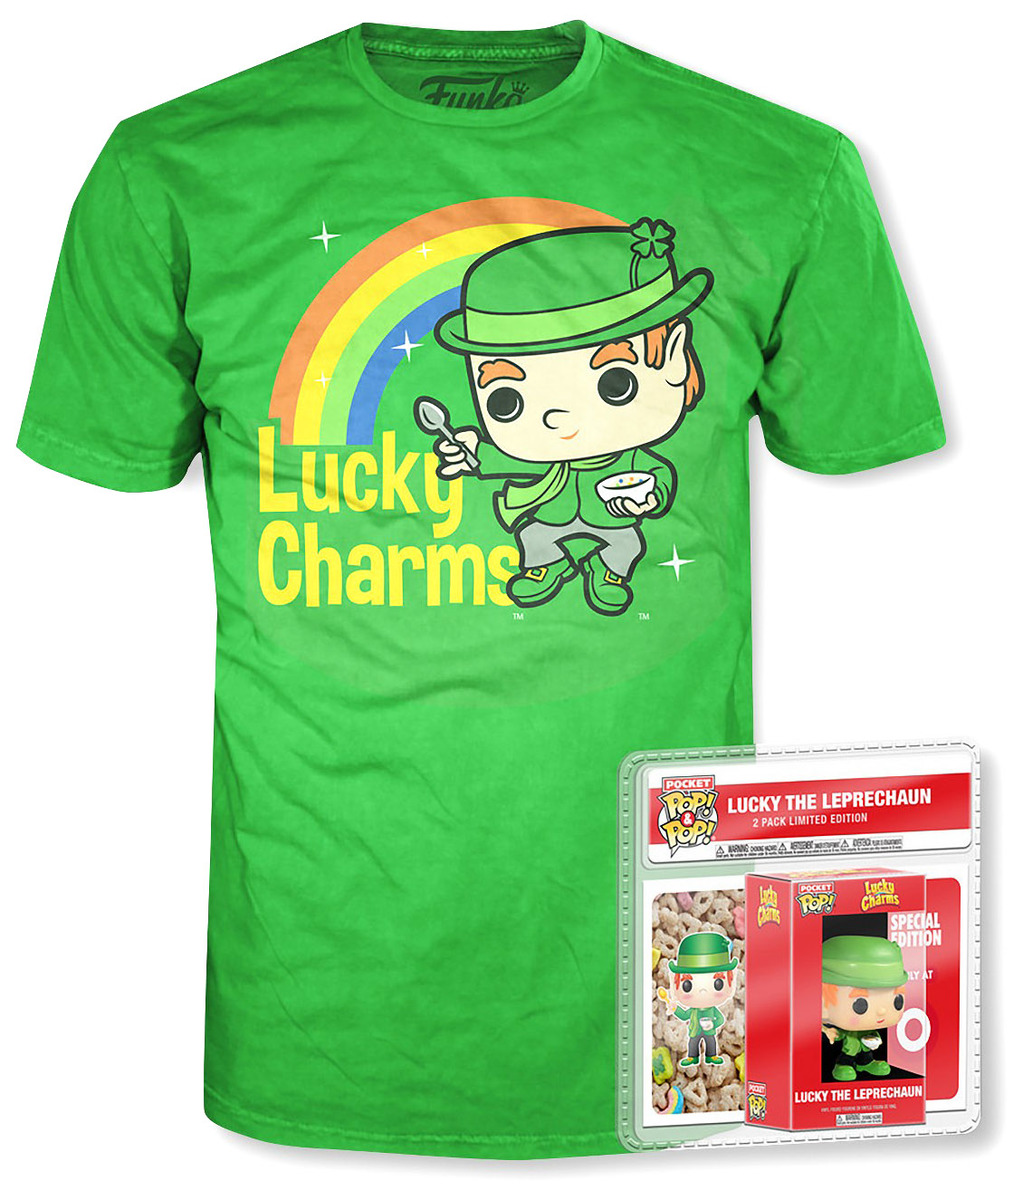 Funko POP! Tees Lucky Charms T-Shirt + Pocket Pop! Lucky The Leprechaun For Kids - Limited